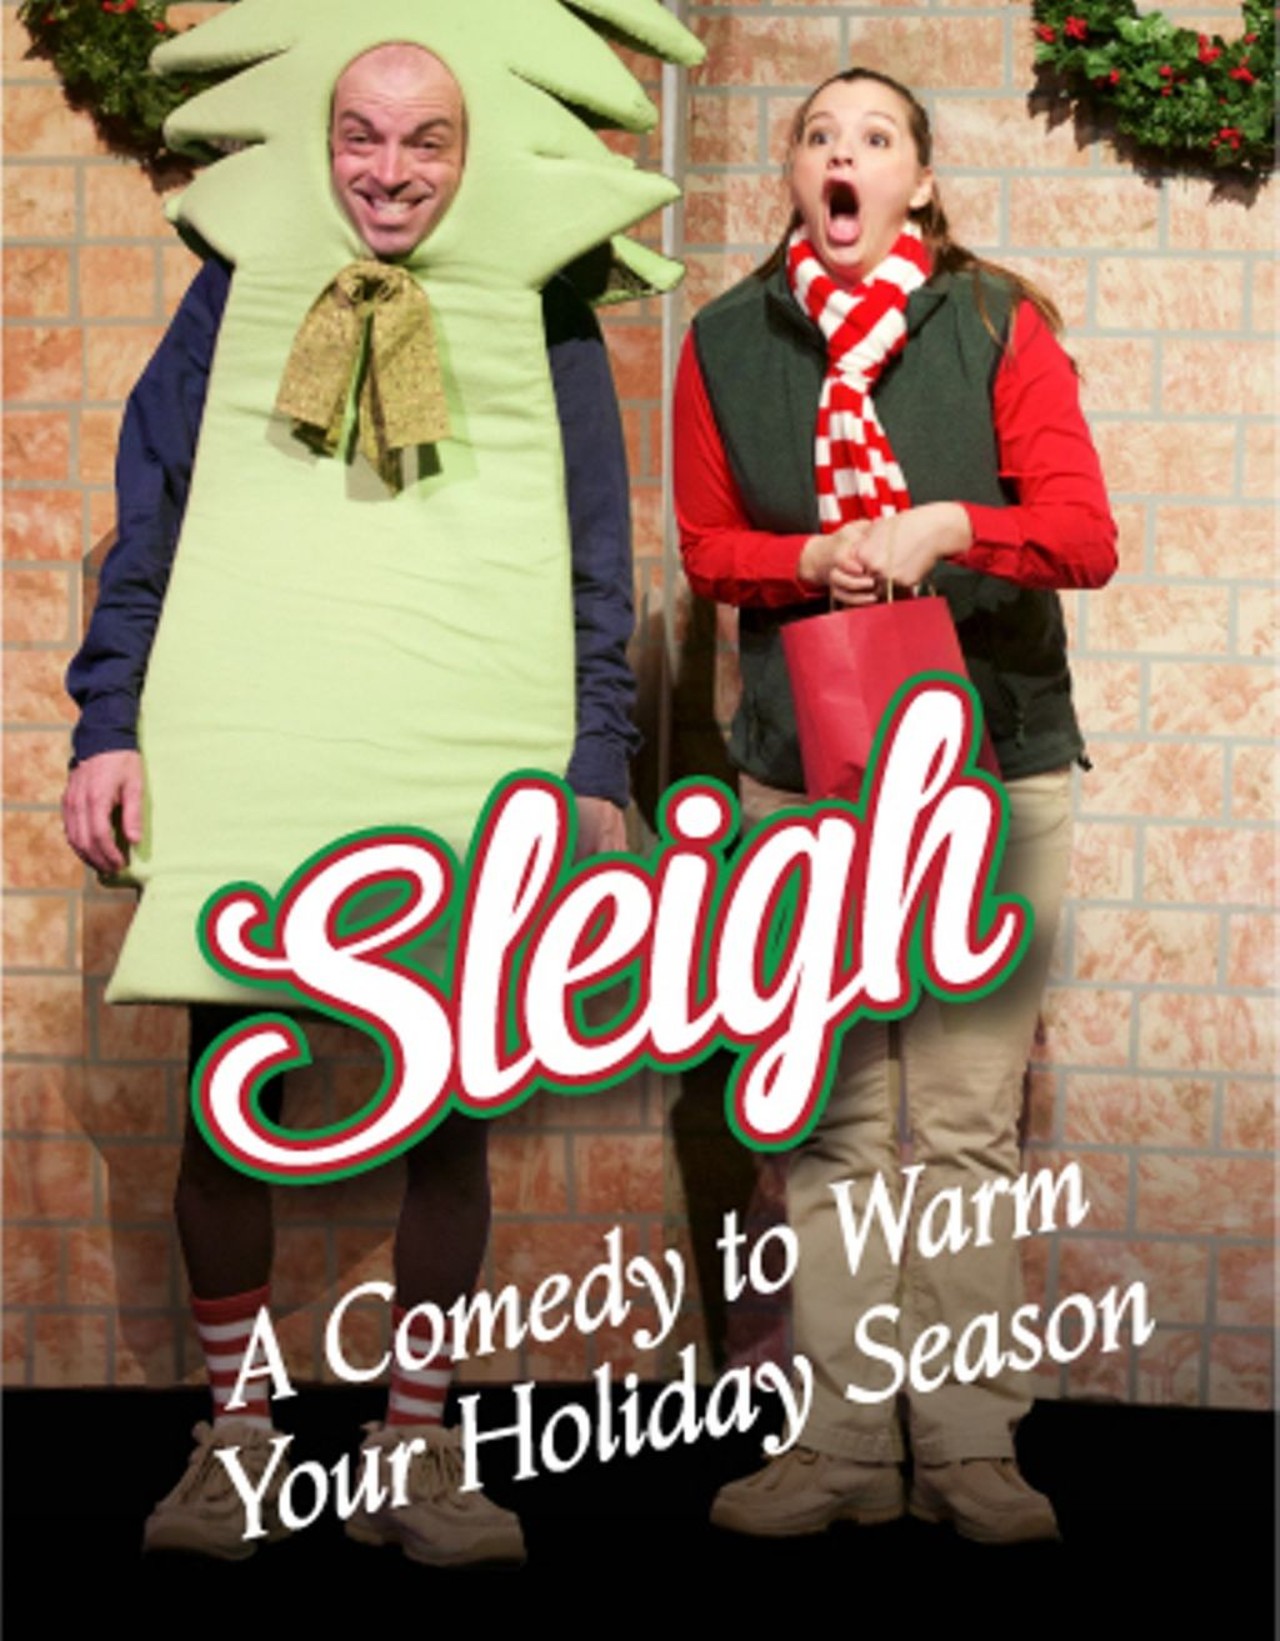 Saturday, Dec. 22Sleigh! at the Clermont Performing Arts Center